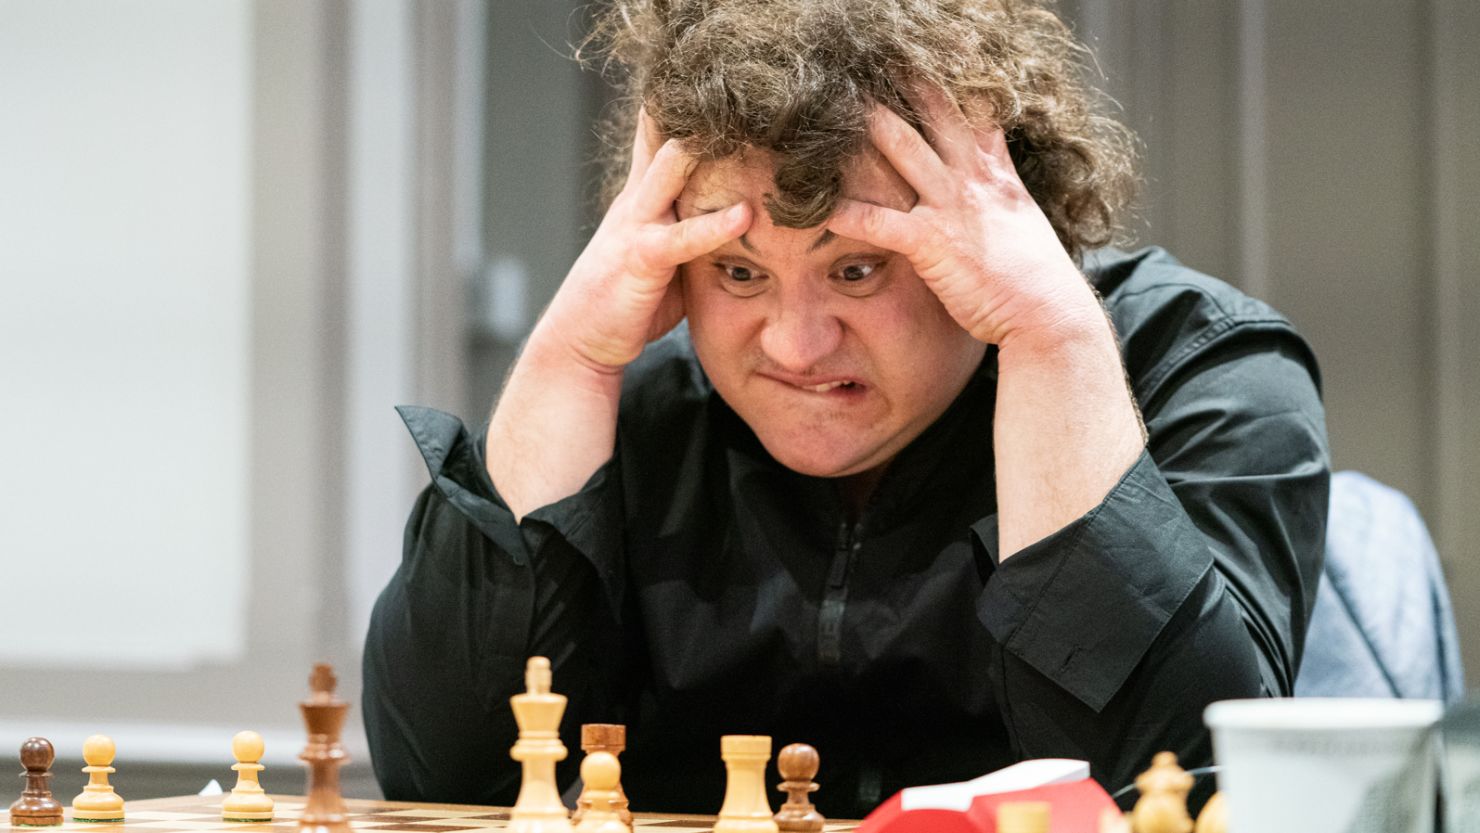 The Dark Side of Chess: When Is a Grandmaster Not So Grand? - The